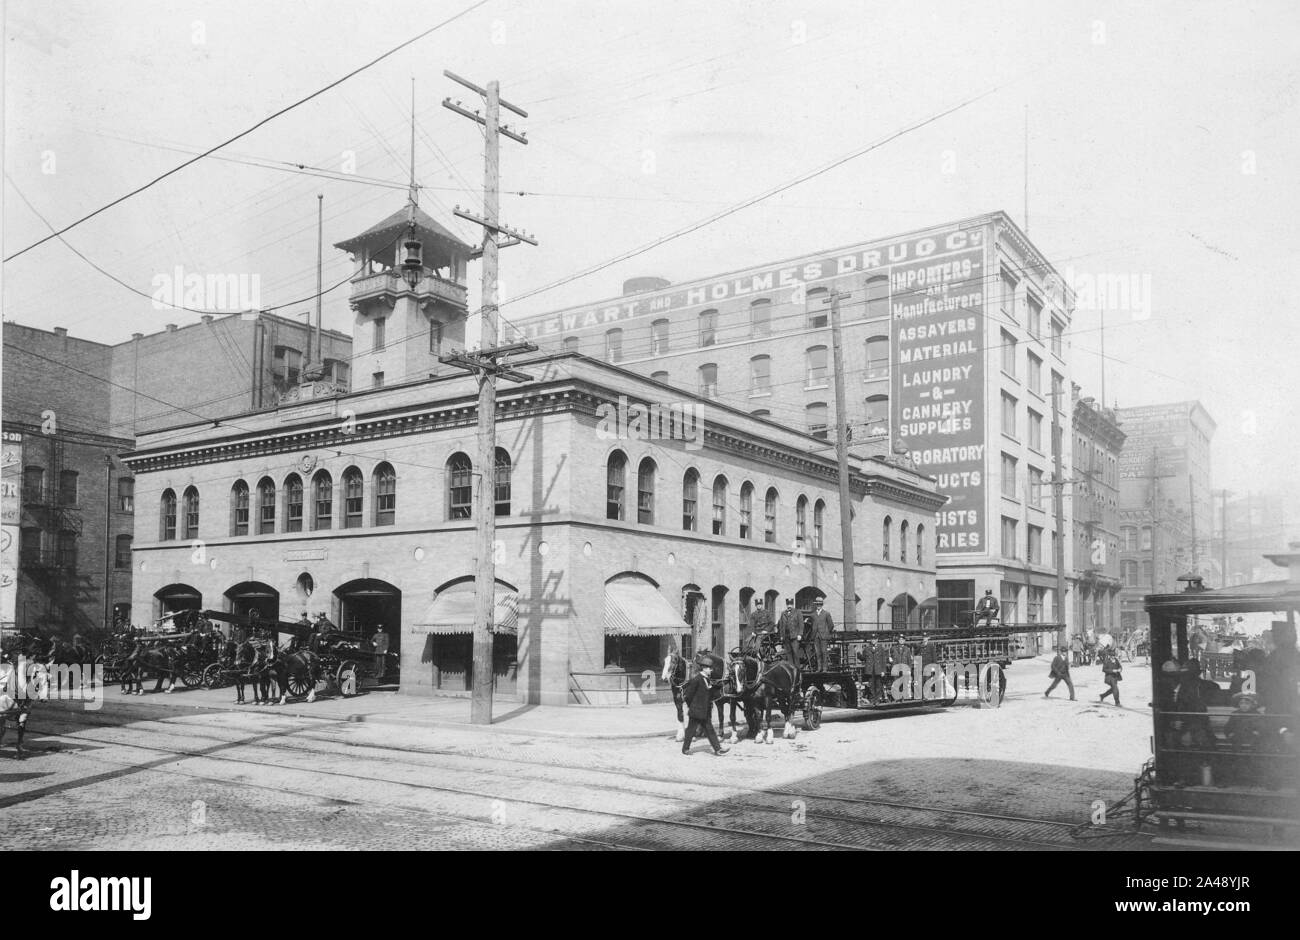 Firehouse No 10 showing horse drawn fire wagons and equipment, Seattle, ca 1905 (WARNER 638). Stock Photo